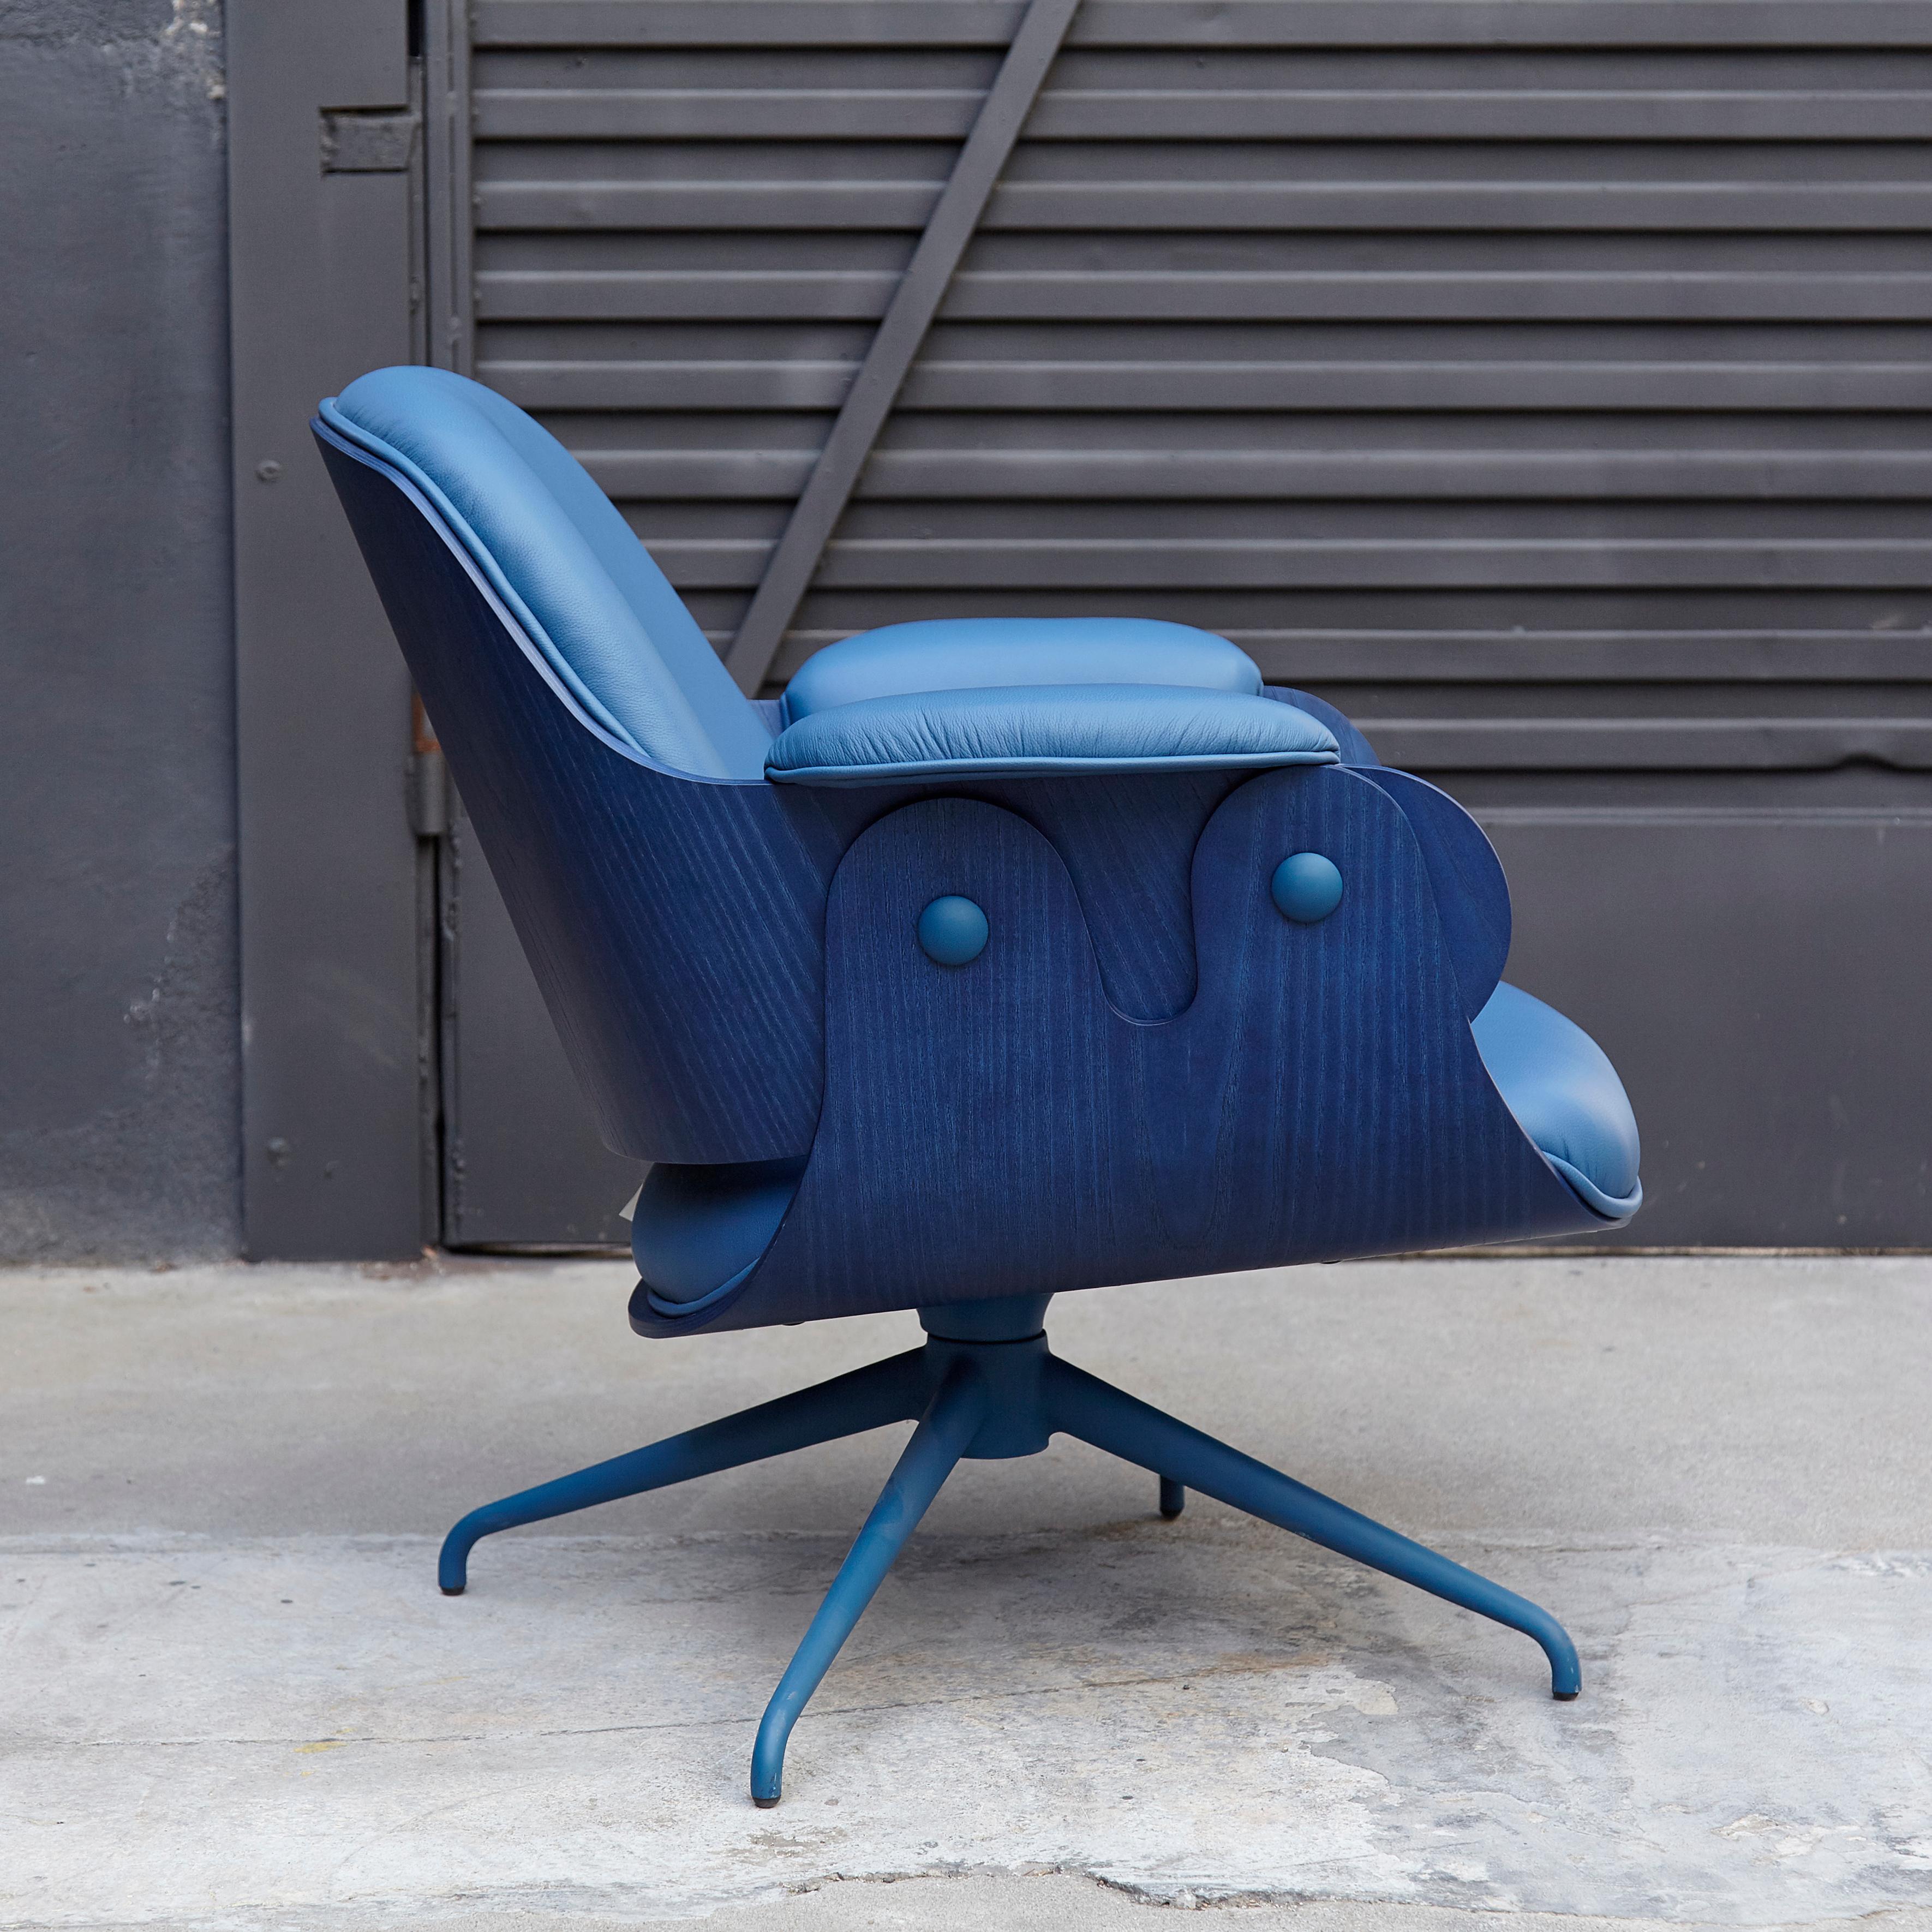 Upholstery Jaime Hayon, Contemporary, Blue Low Lounger Armchair